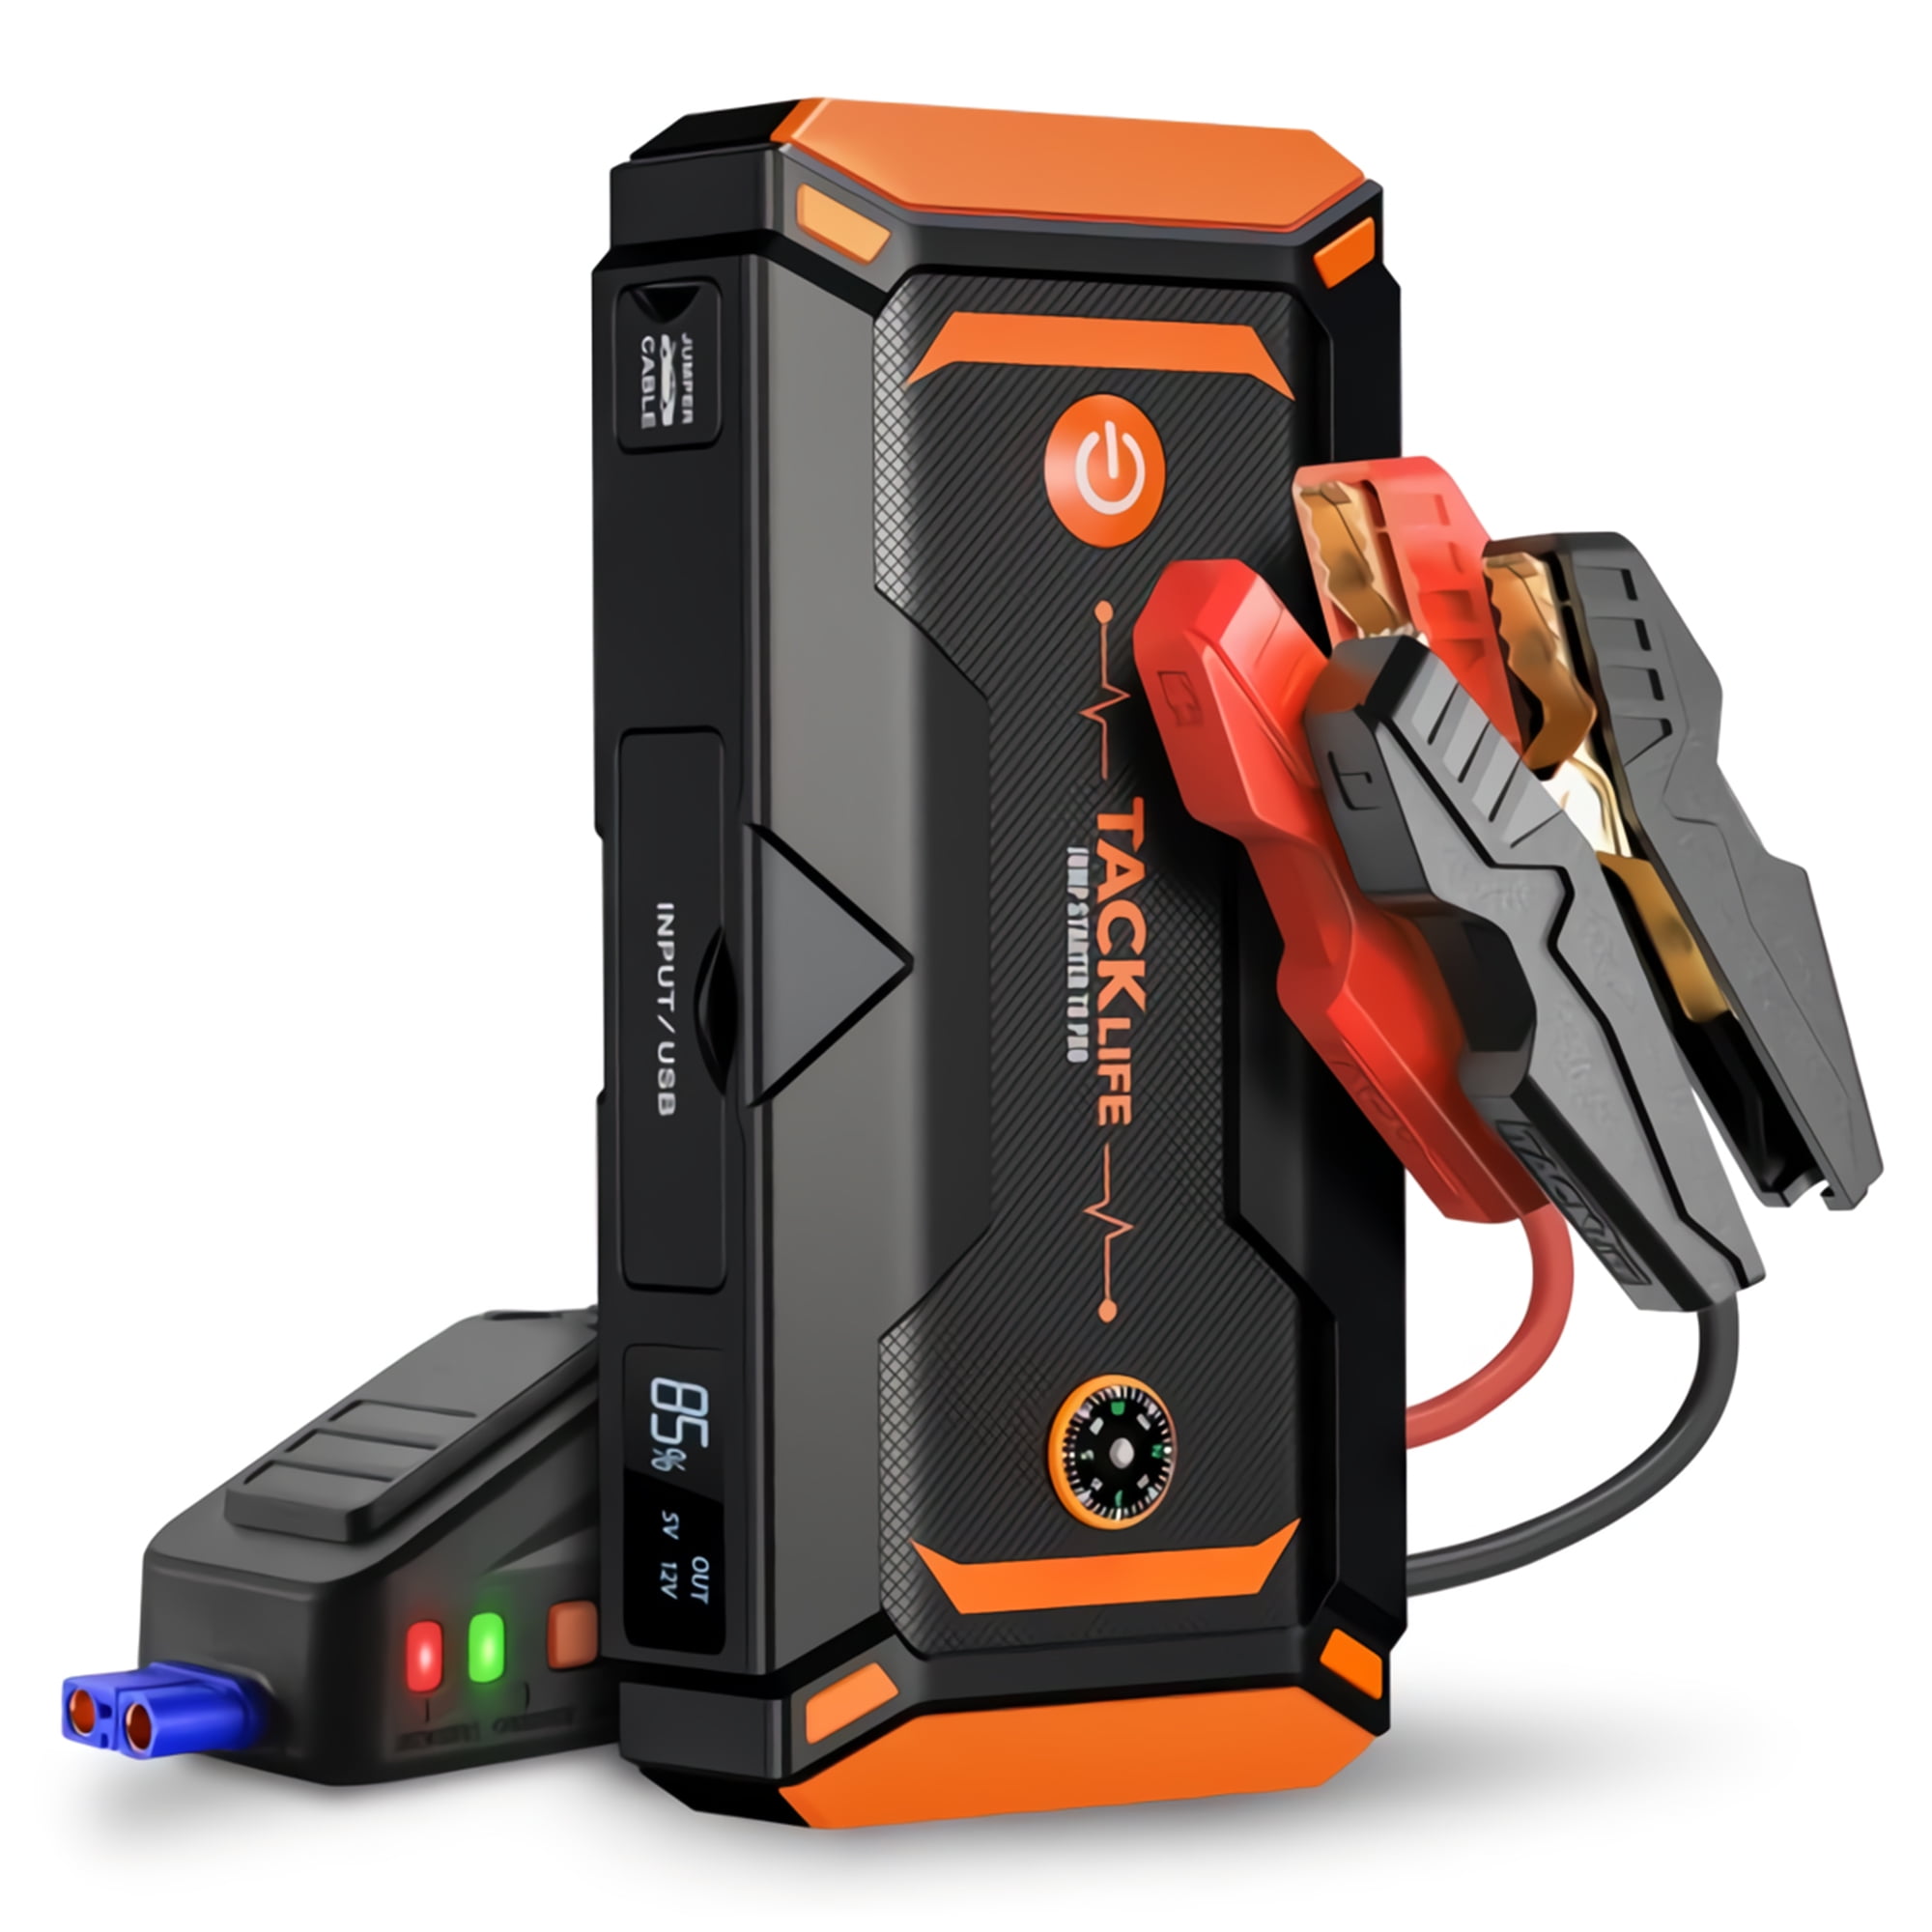 TACKLIFE T8 Pro 1200A Peak 18000mAh Water Resistant Car Jump Starter  Review, Possibly the perfect gi 